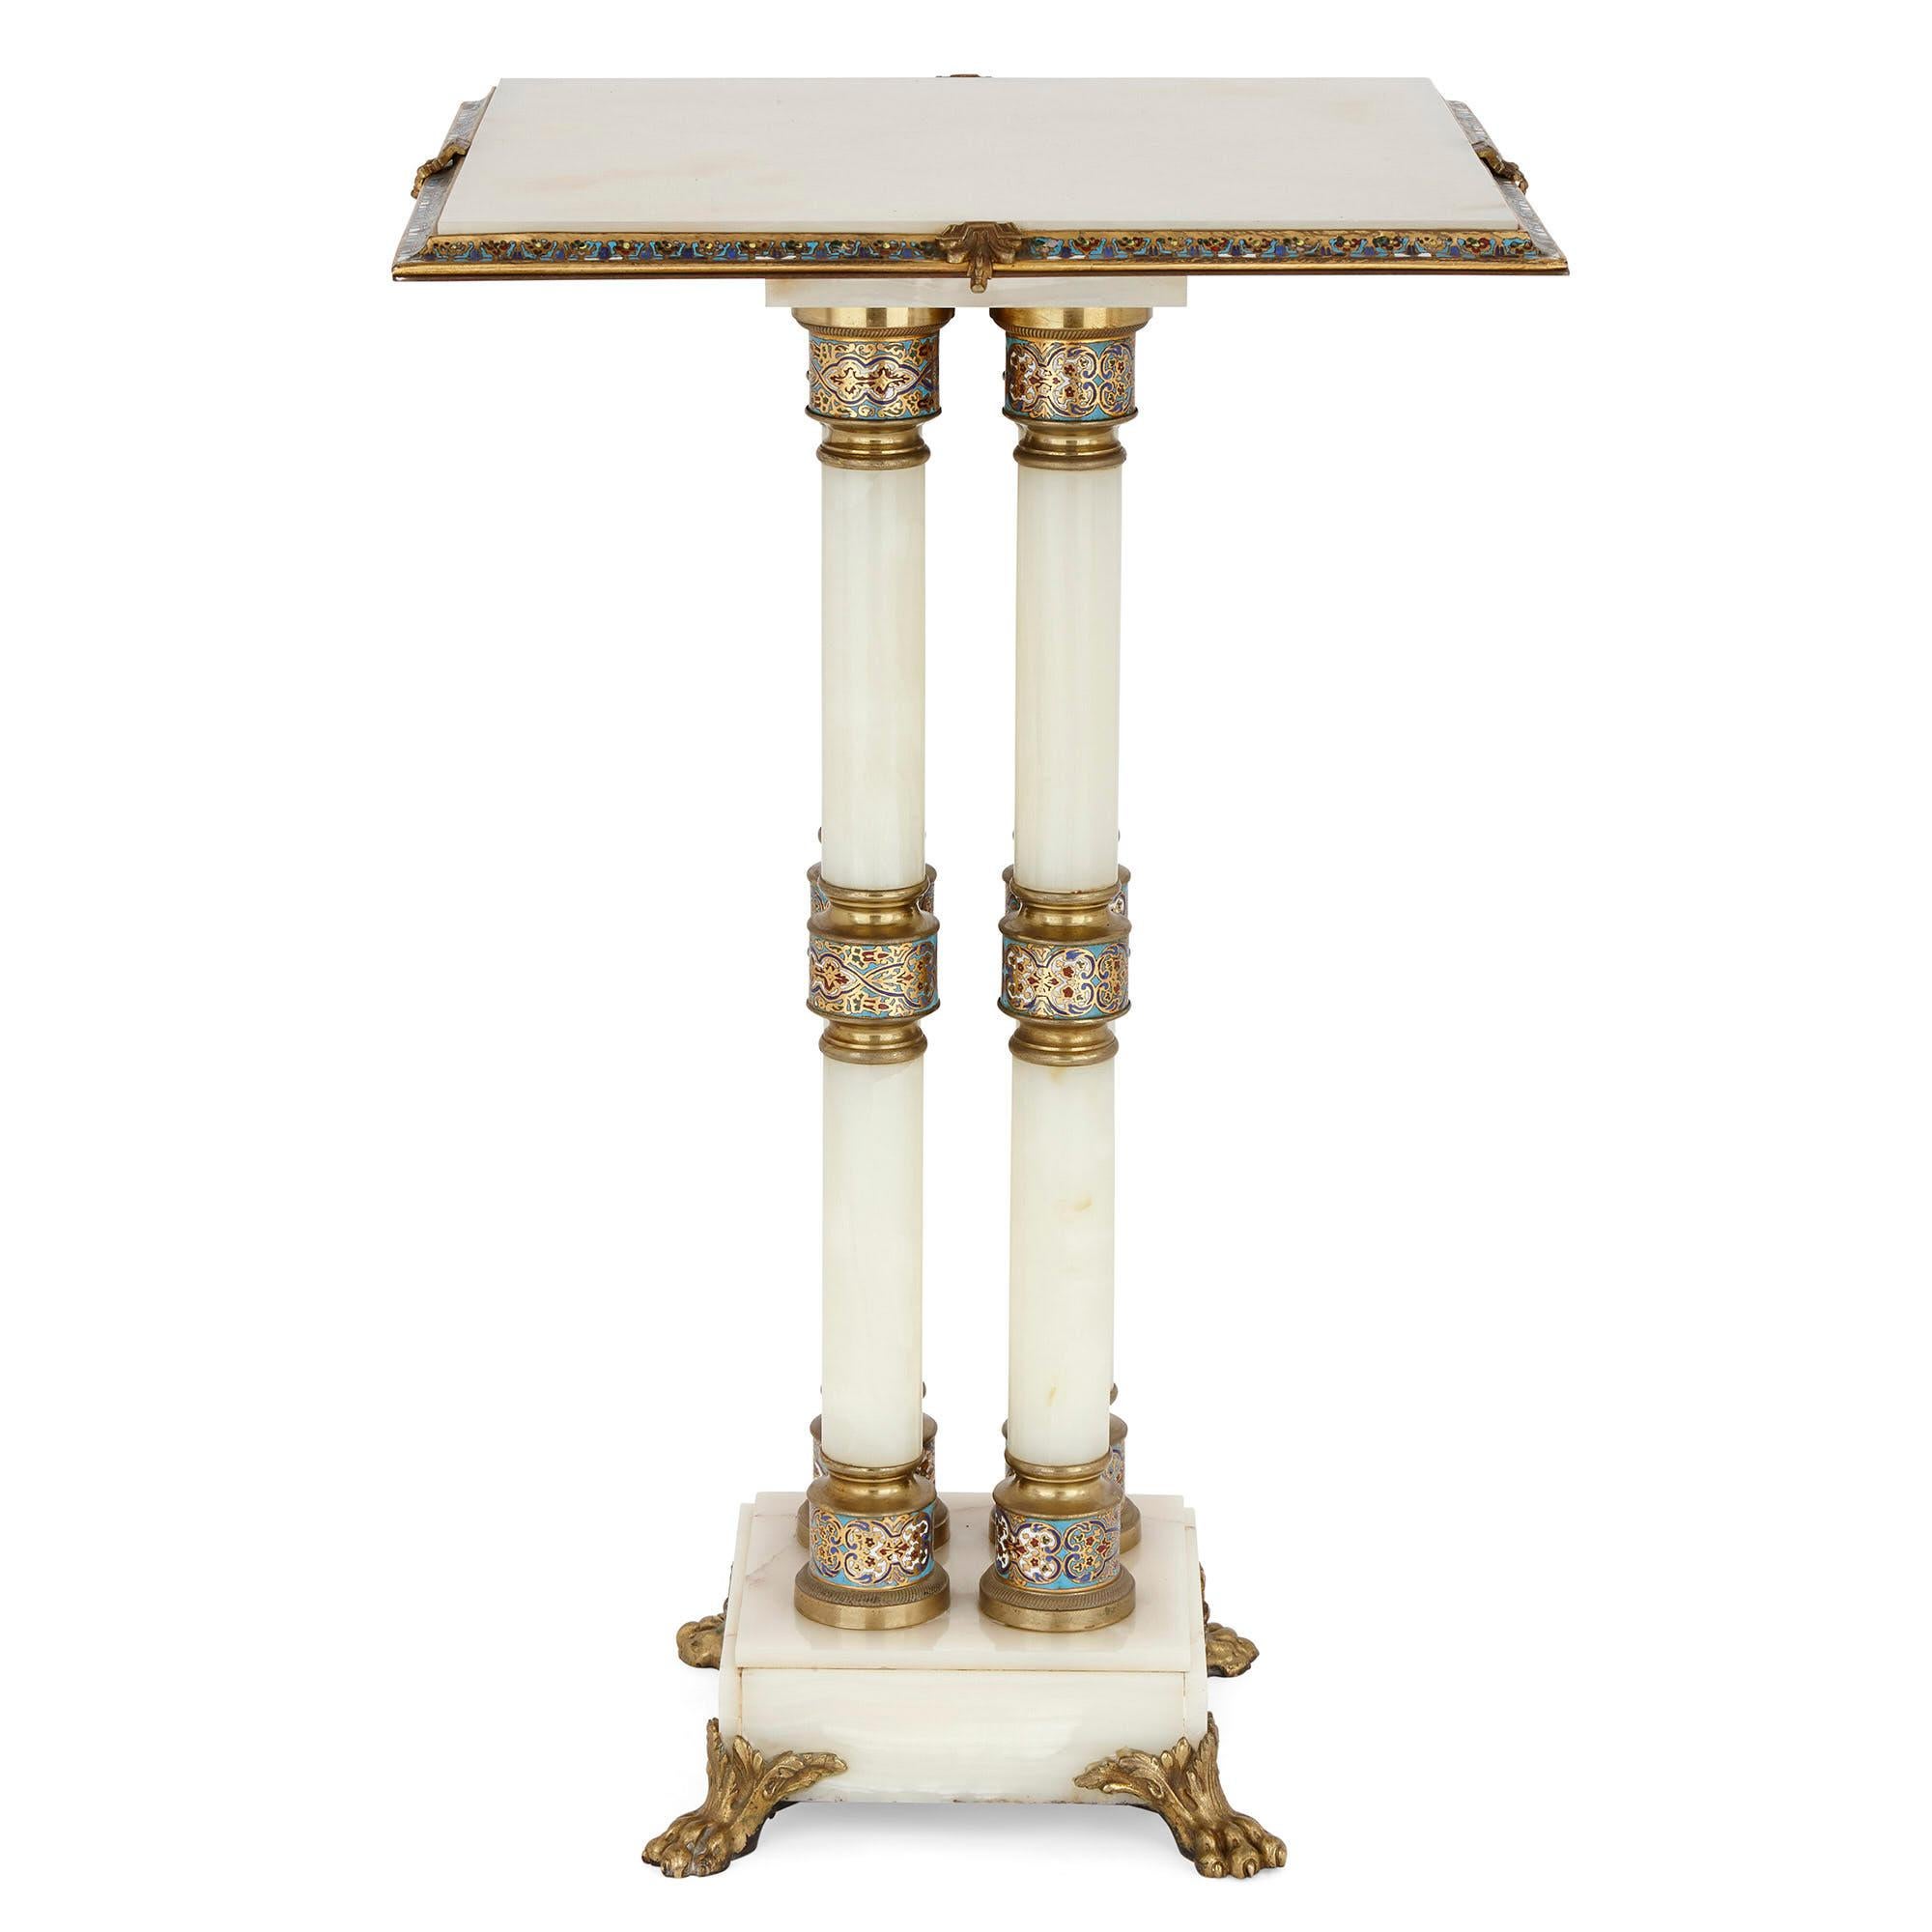 This stunning occasional table is crafted from onyx, gilt bronze, and champlevé enamel, the result being a beautiful combination of colours, textures, and materials. The square tabletop, of white onyx, is edged with a gilt bronze mount, the gilt